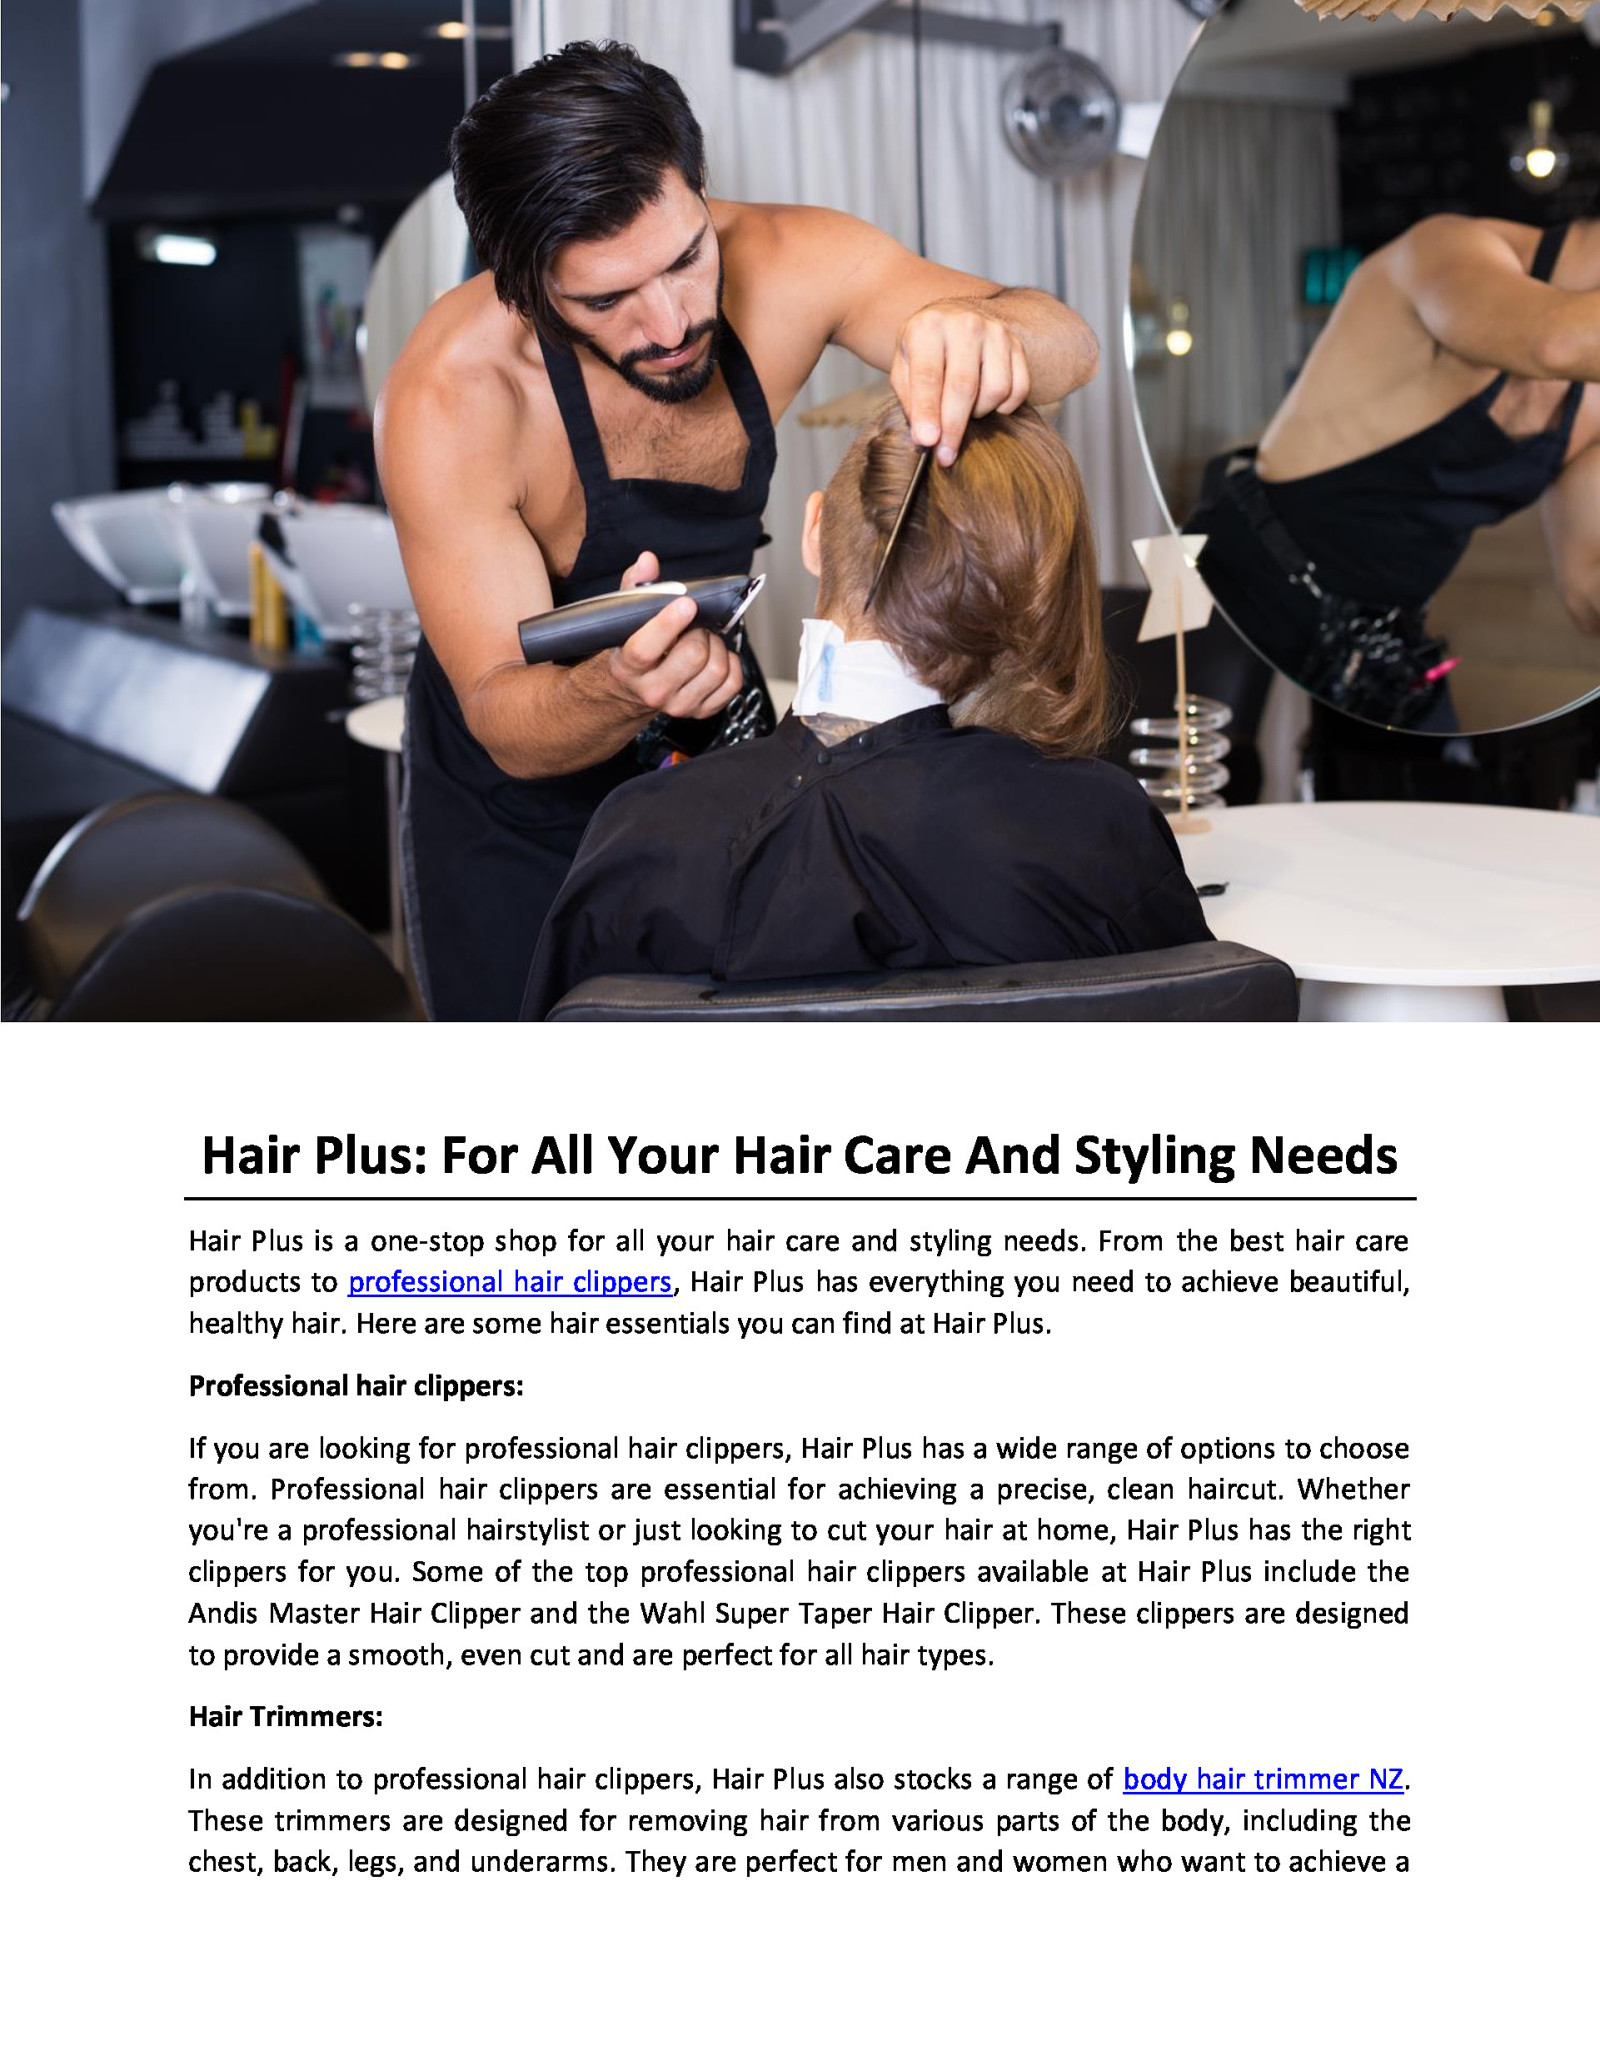 Hair Plus: For All Your Hair Care And Styling Needs